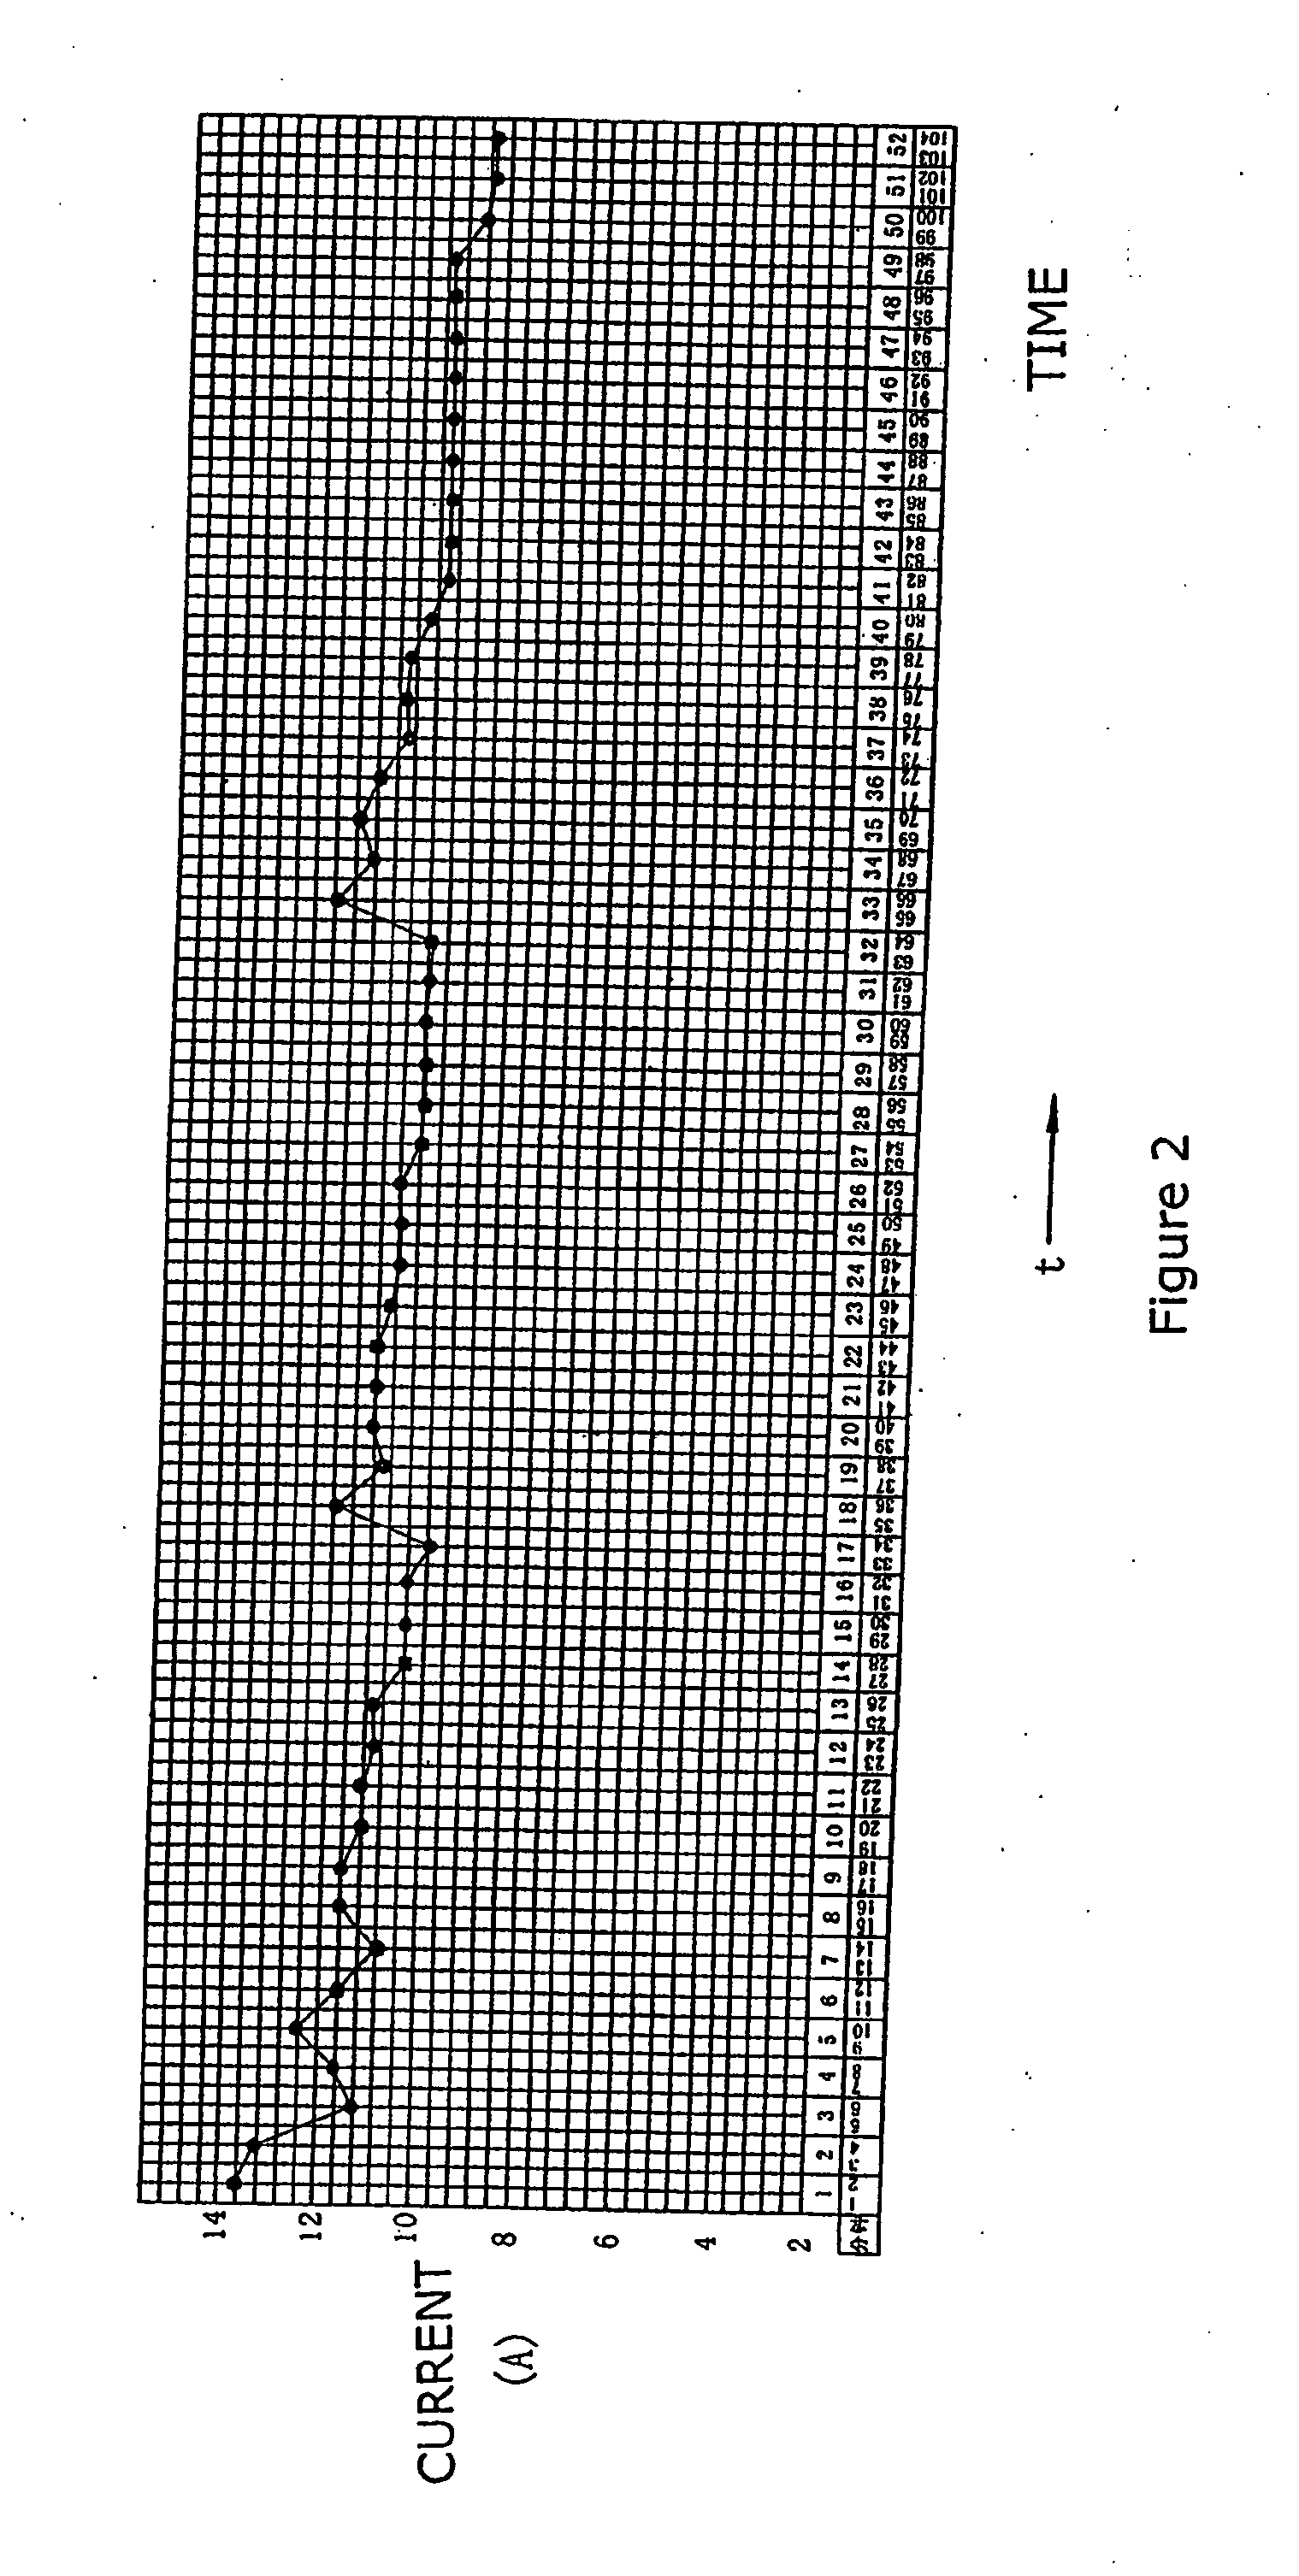 Liquid low-sodium silicate electrolyte used for a storage battery and manufactured by magnetization process, and the usage thereof